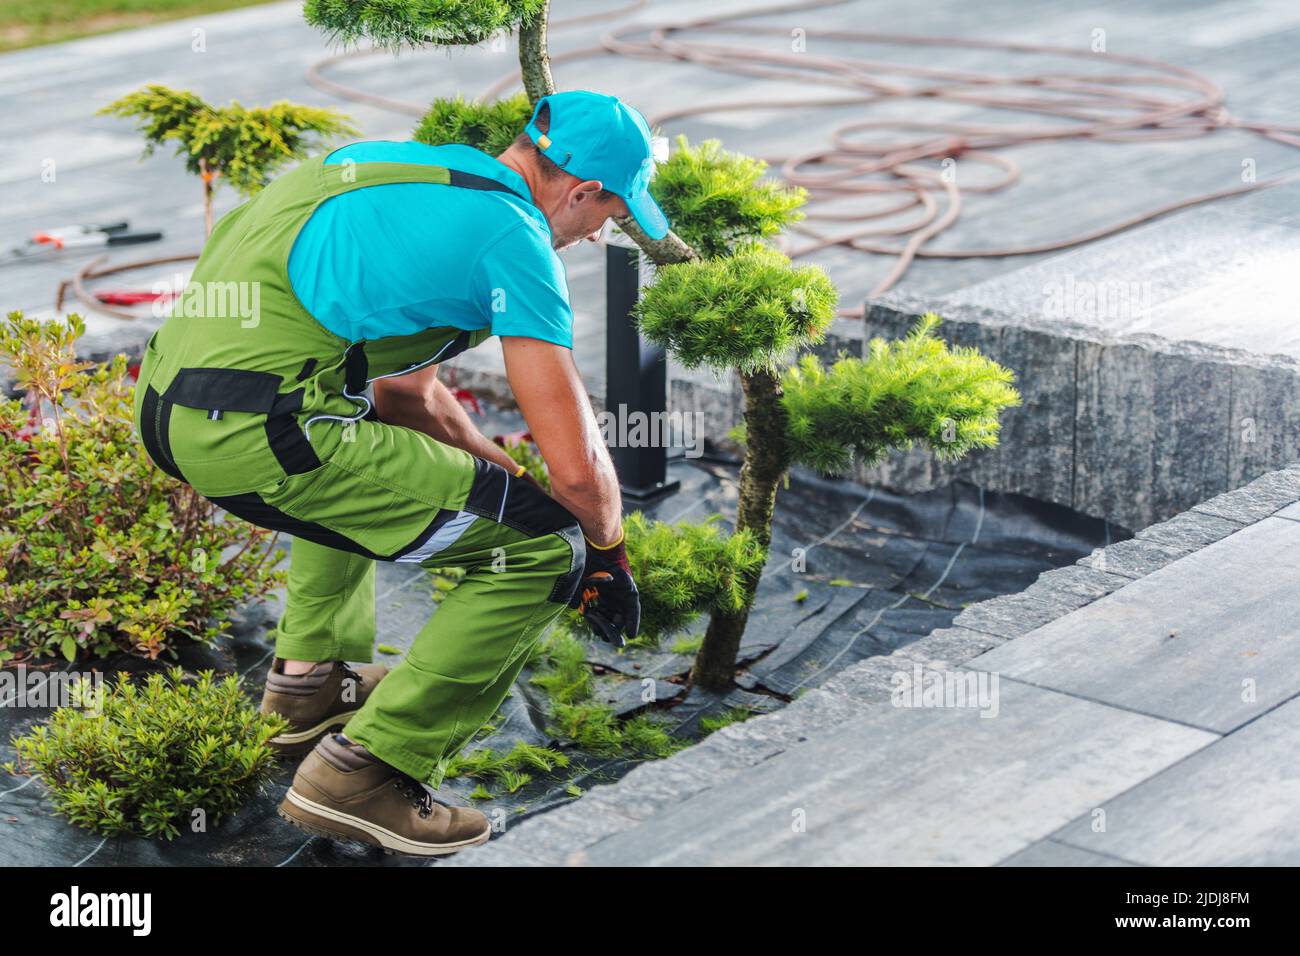 Caucasian Gardener Taking Care of Plant. Shrubs Pruning to Maintain the Appearance of the Landscape Design in the Backyard Garden. Stock Photo